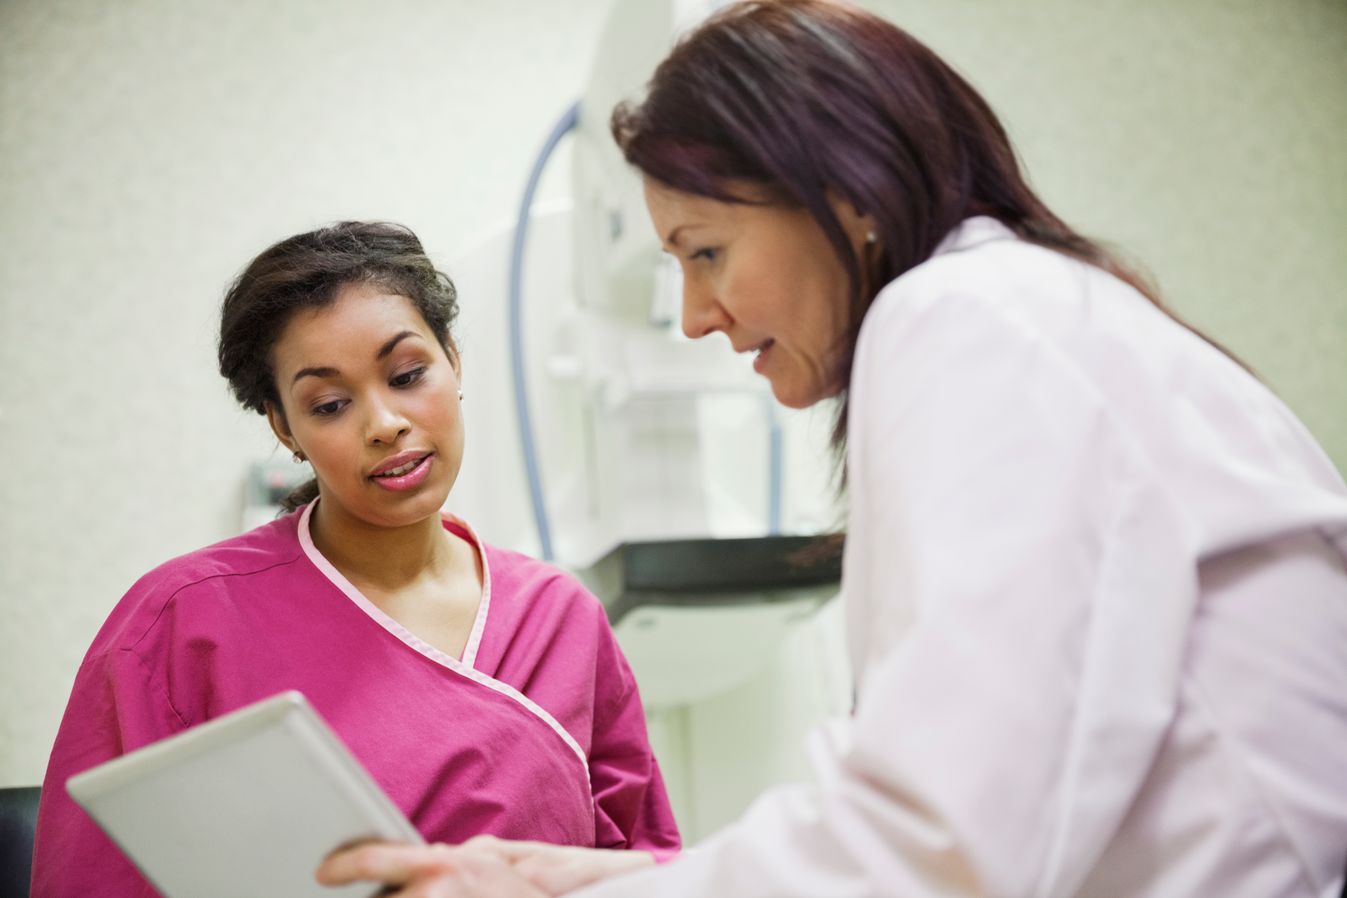 Patient in pink hospital gown talking to a doctor about her results